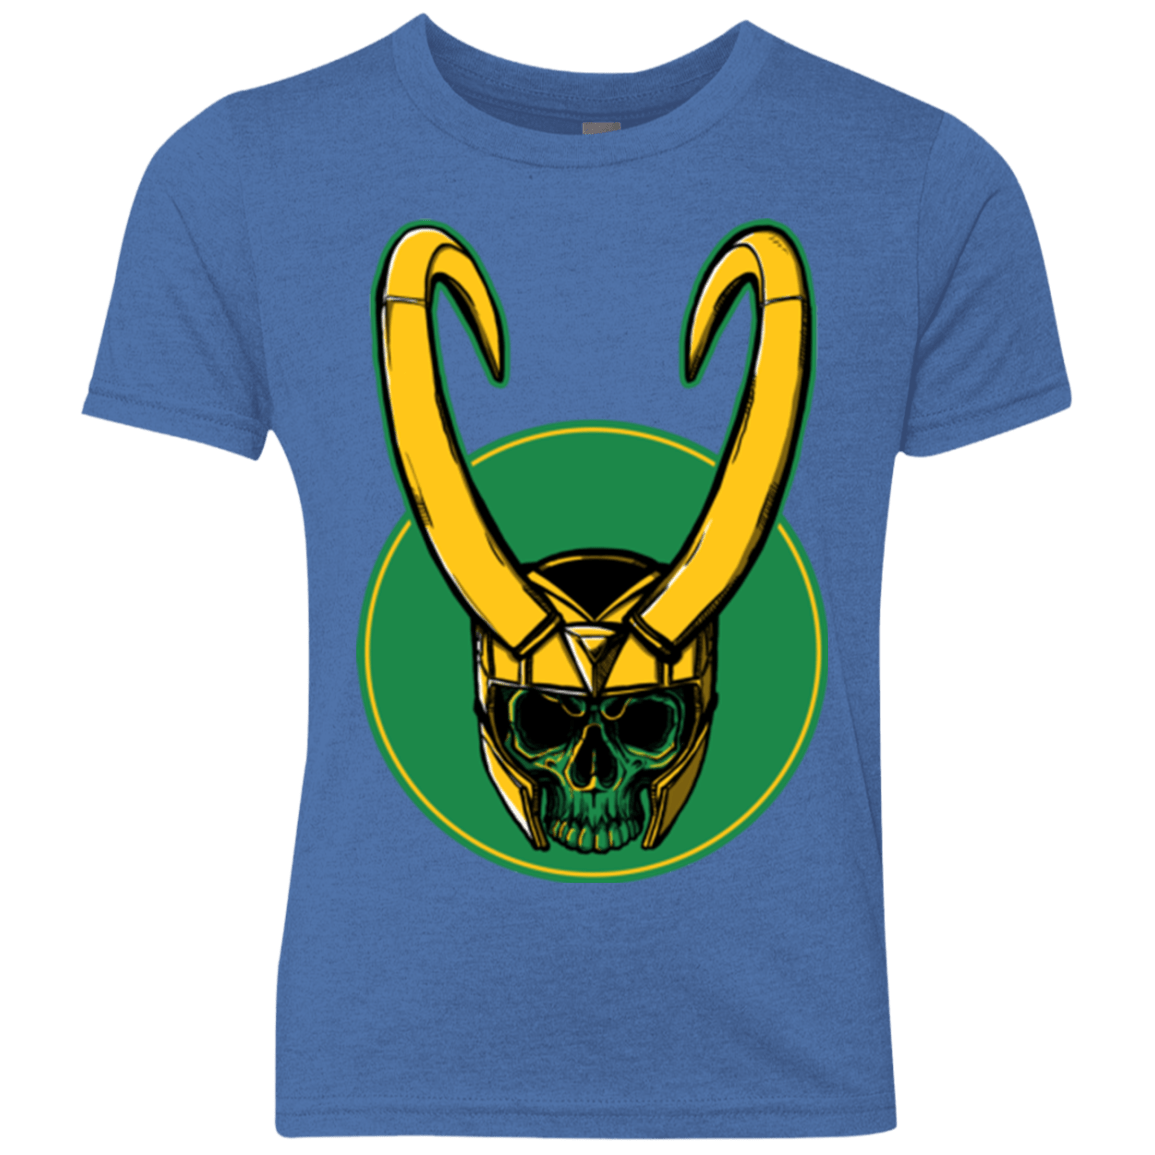 Tricksters End Youth Triblend T-Shirt